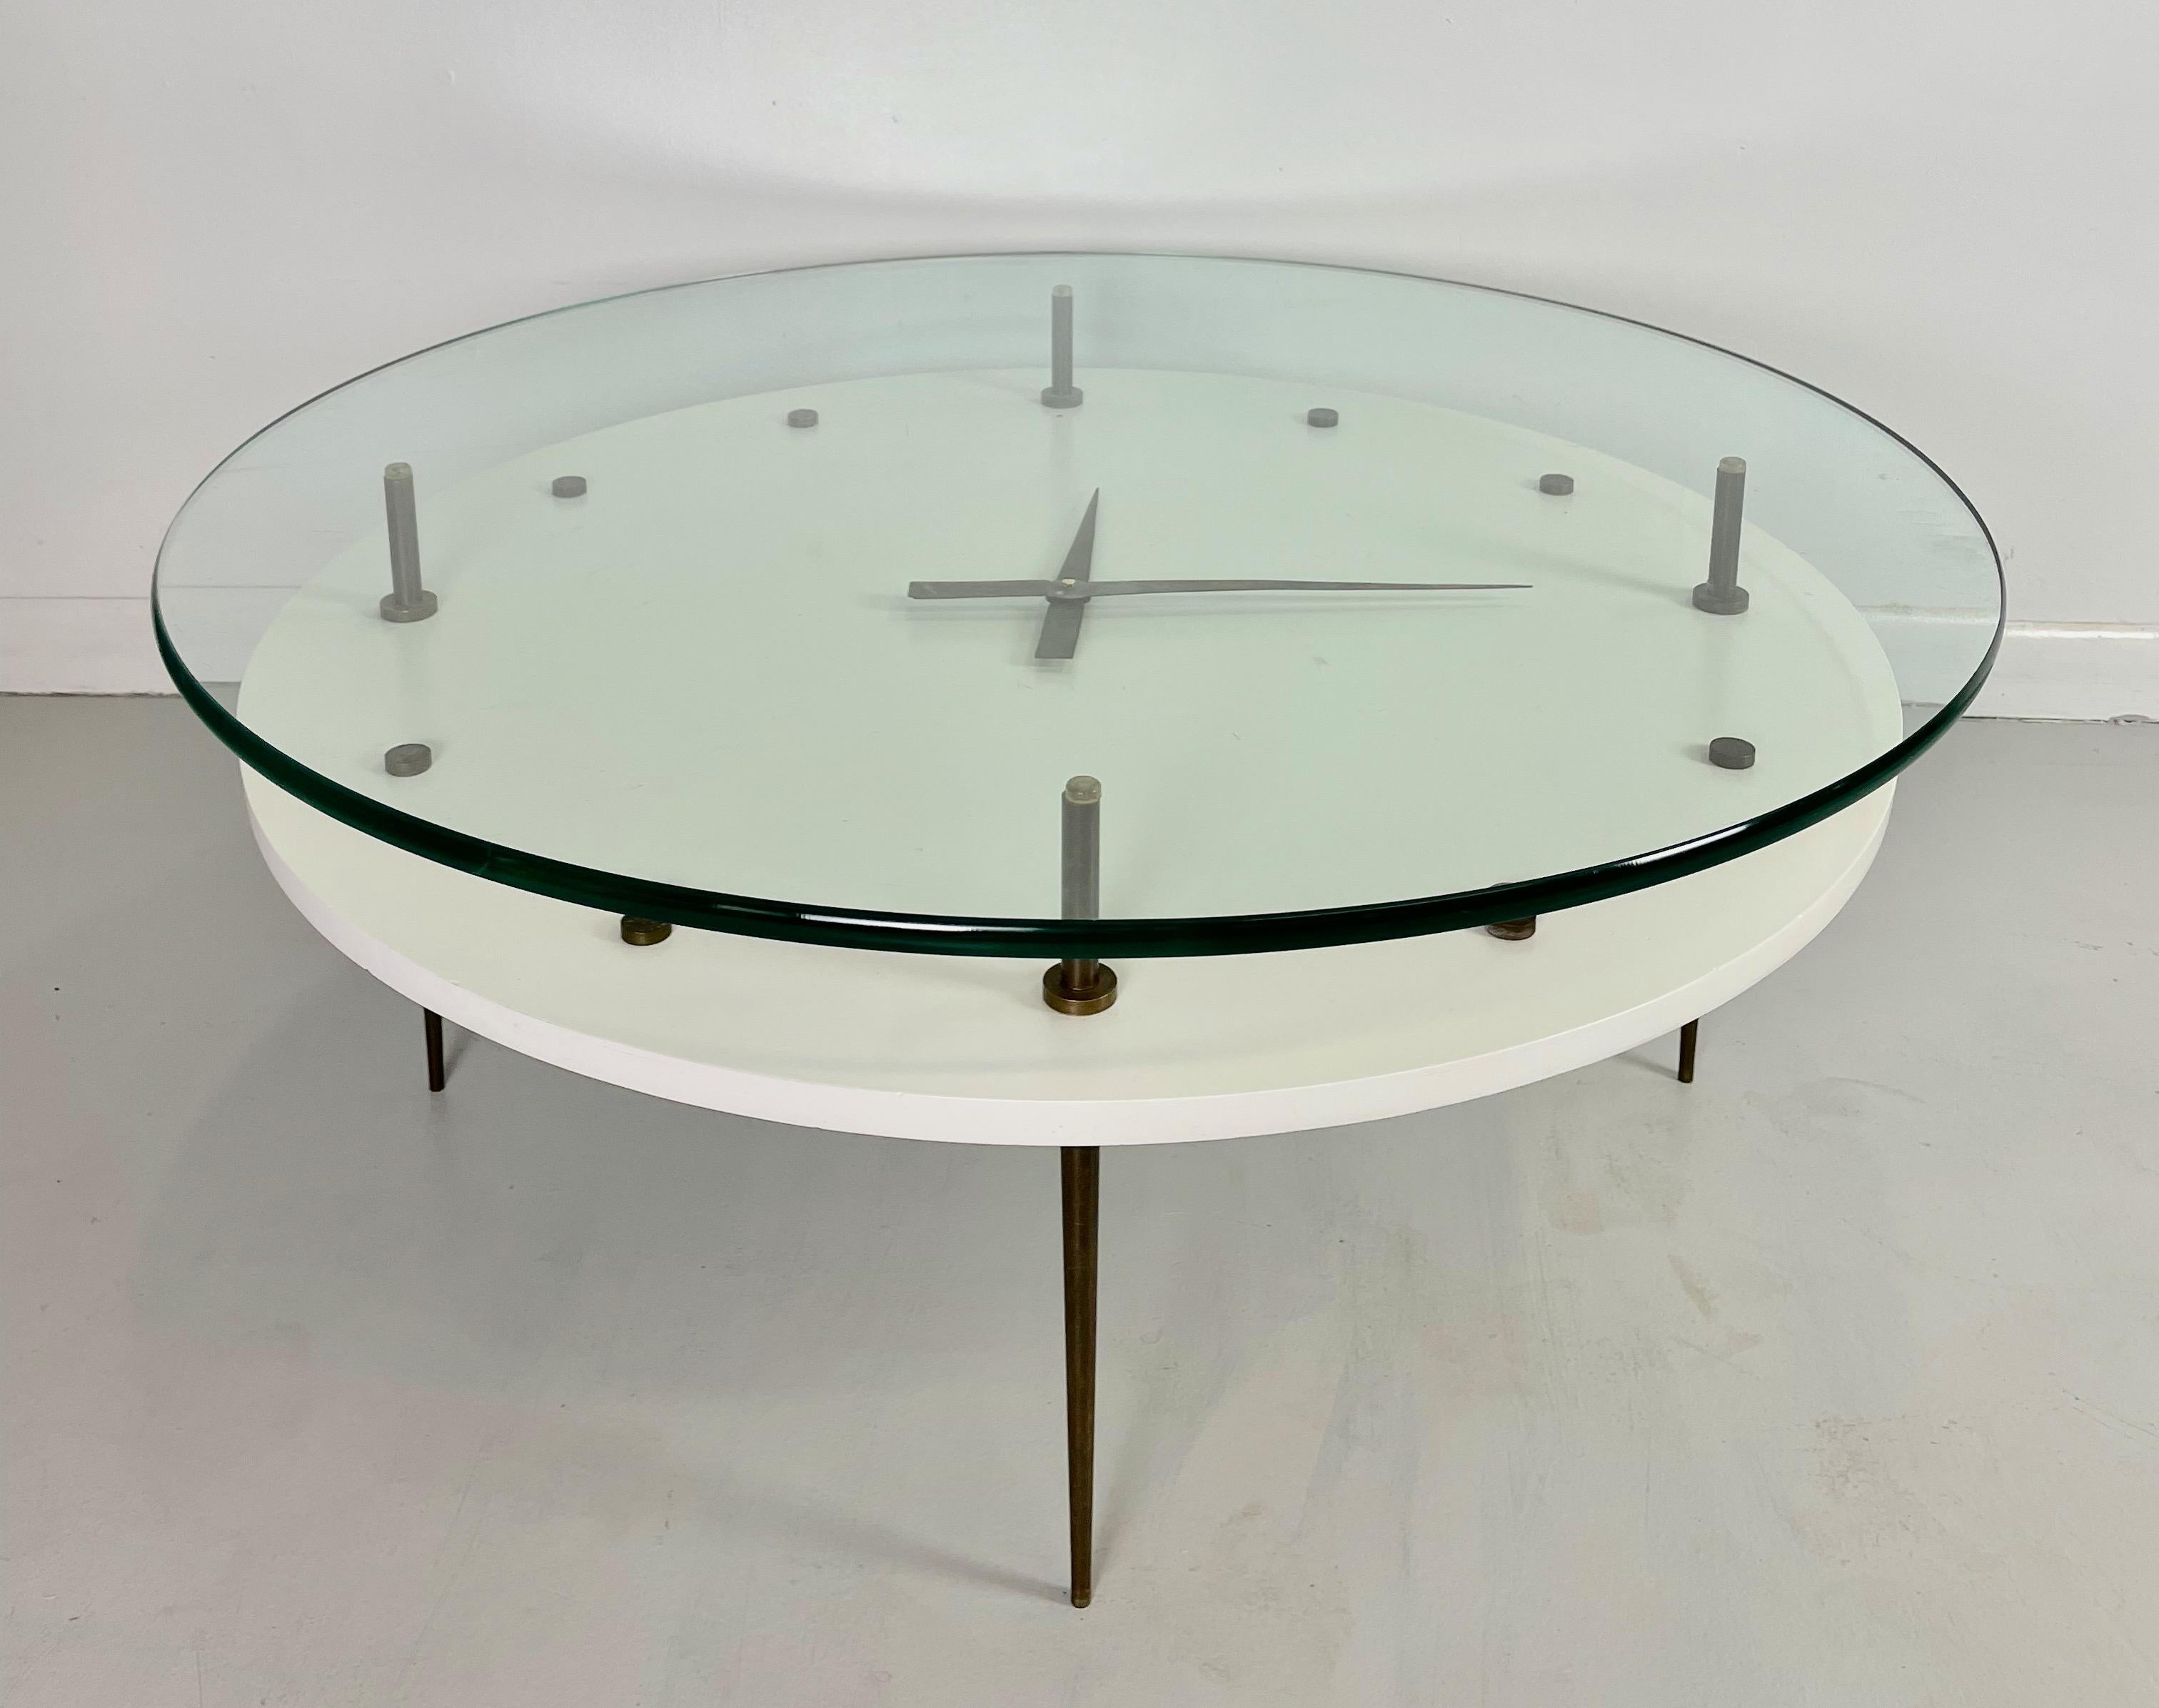 Italian coffee table comprised of lacquer table with solid brass fittings and slender tapered legs. Measures: The glass top is 32